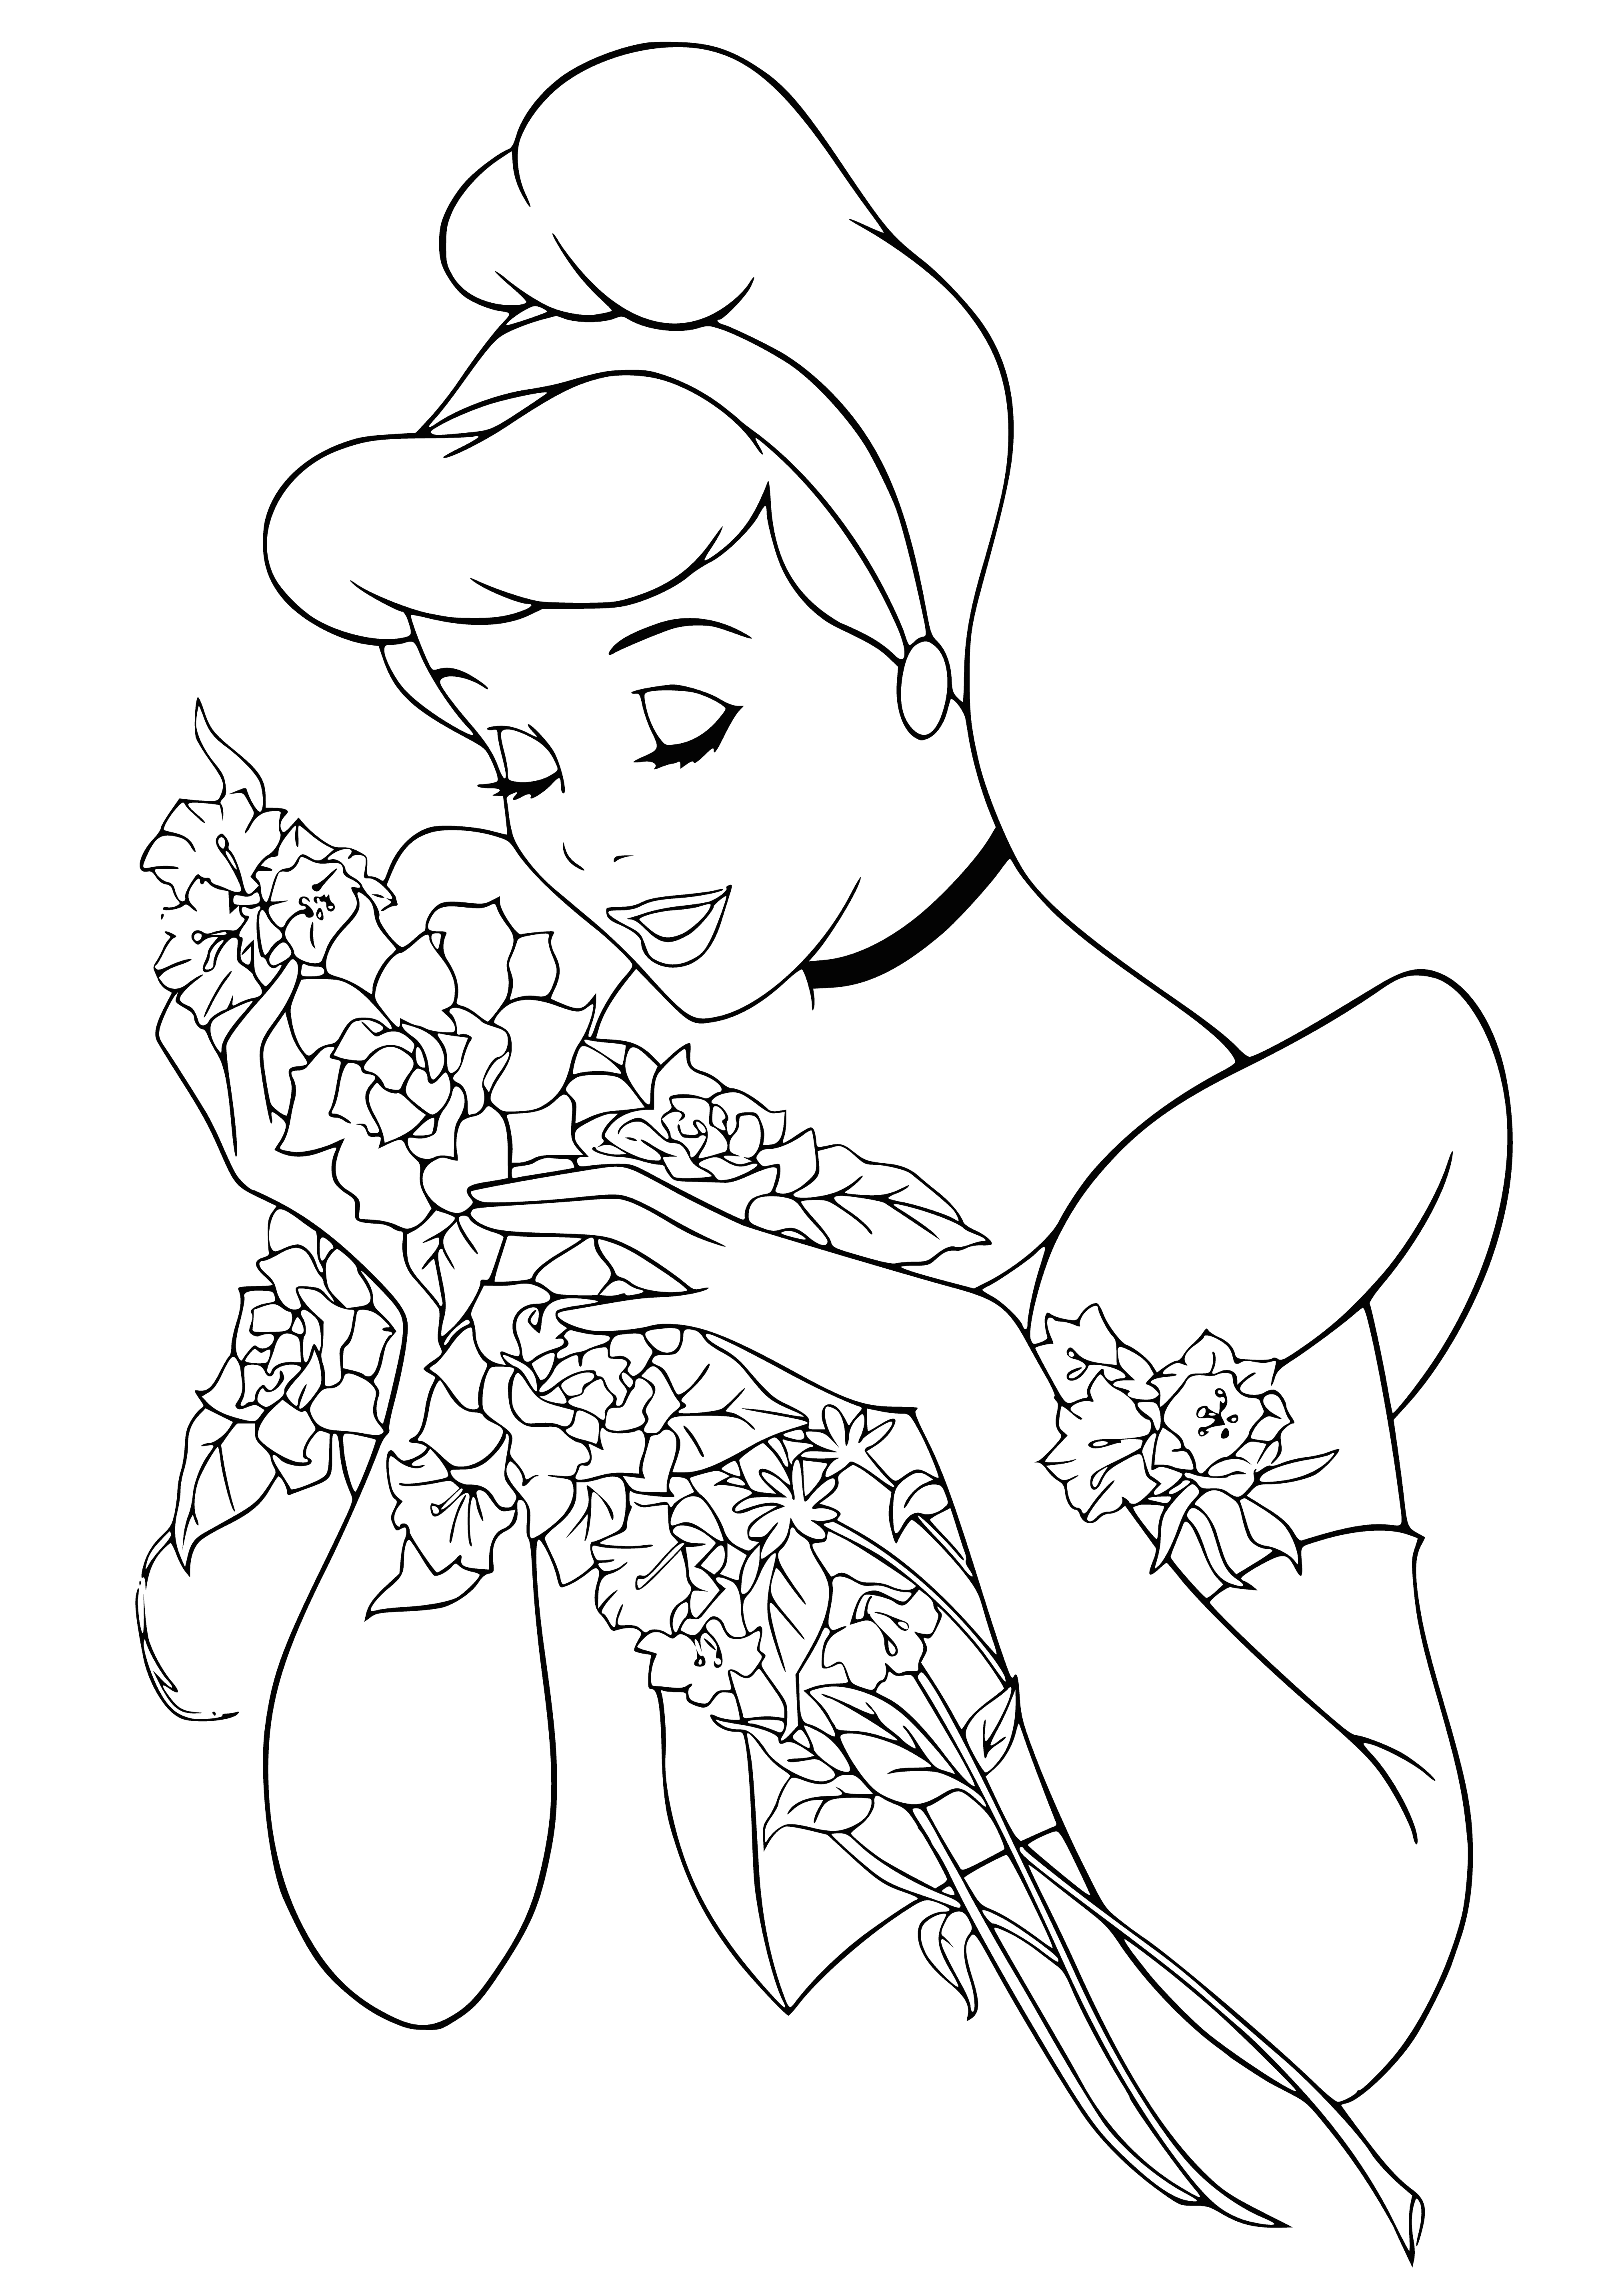 coloring page: Cinderella smiles, ready to go to the ball in her light blue dress with white collar and puffy sleeves, white ribbon in her hair, and surrounded by tall pink, yellow, and white flowers.